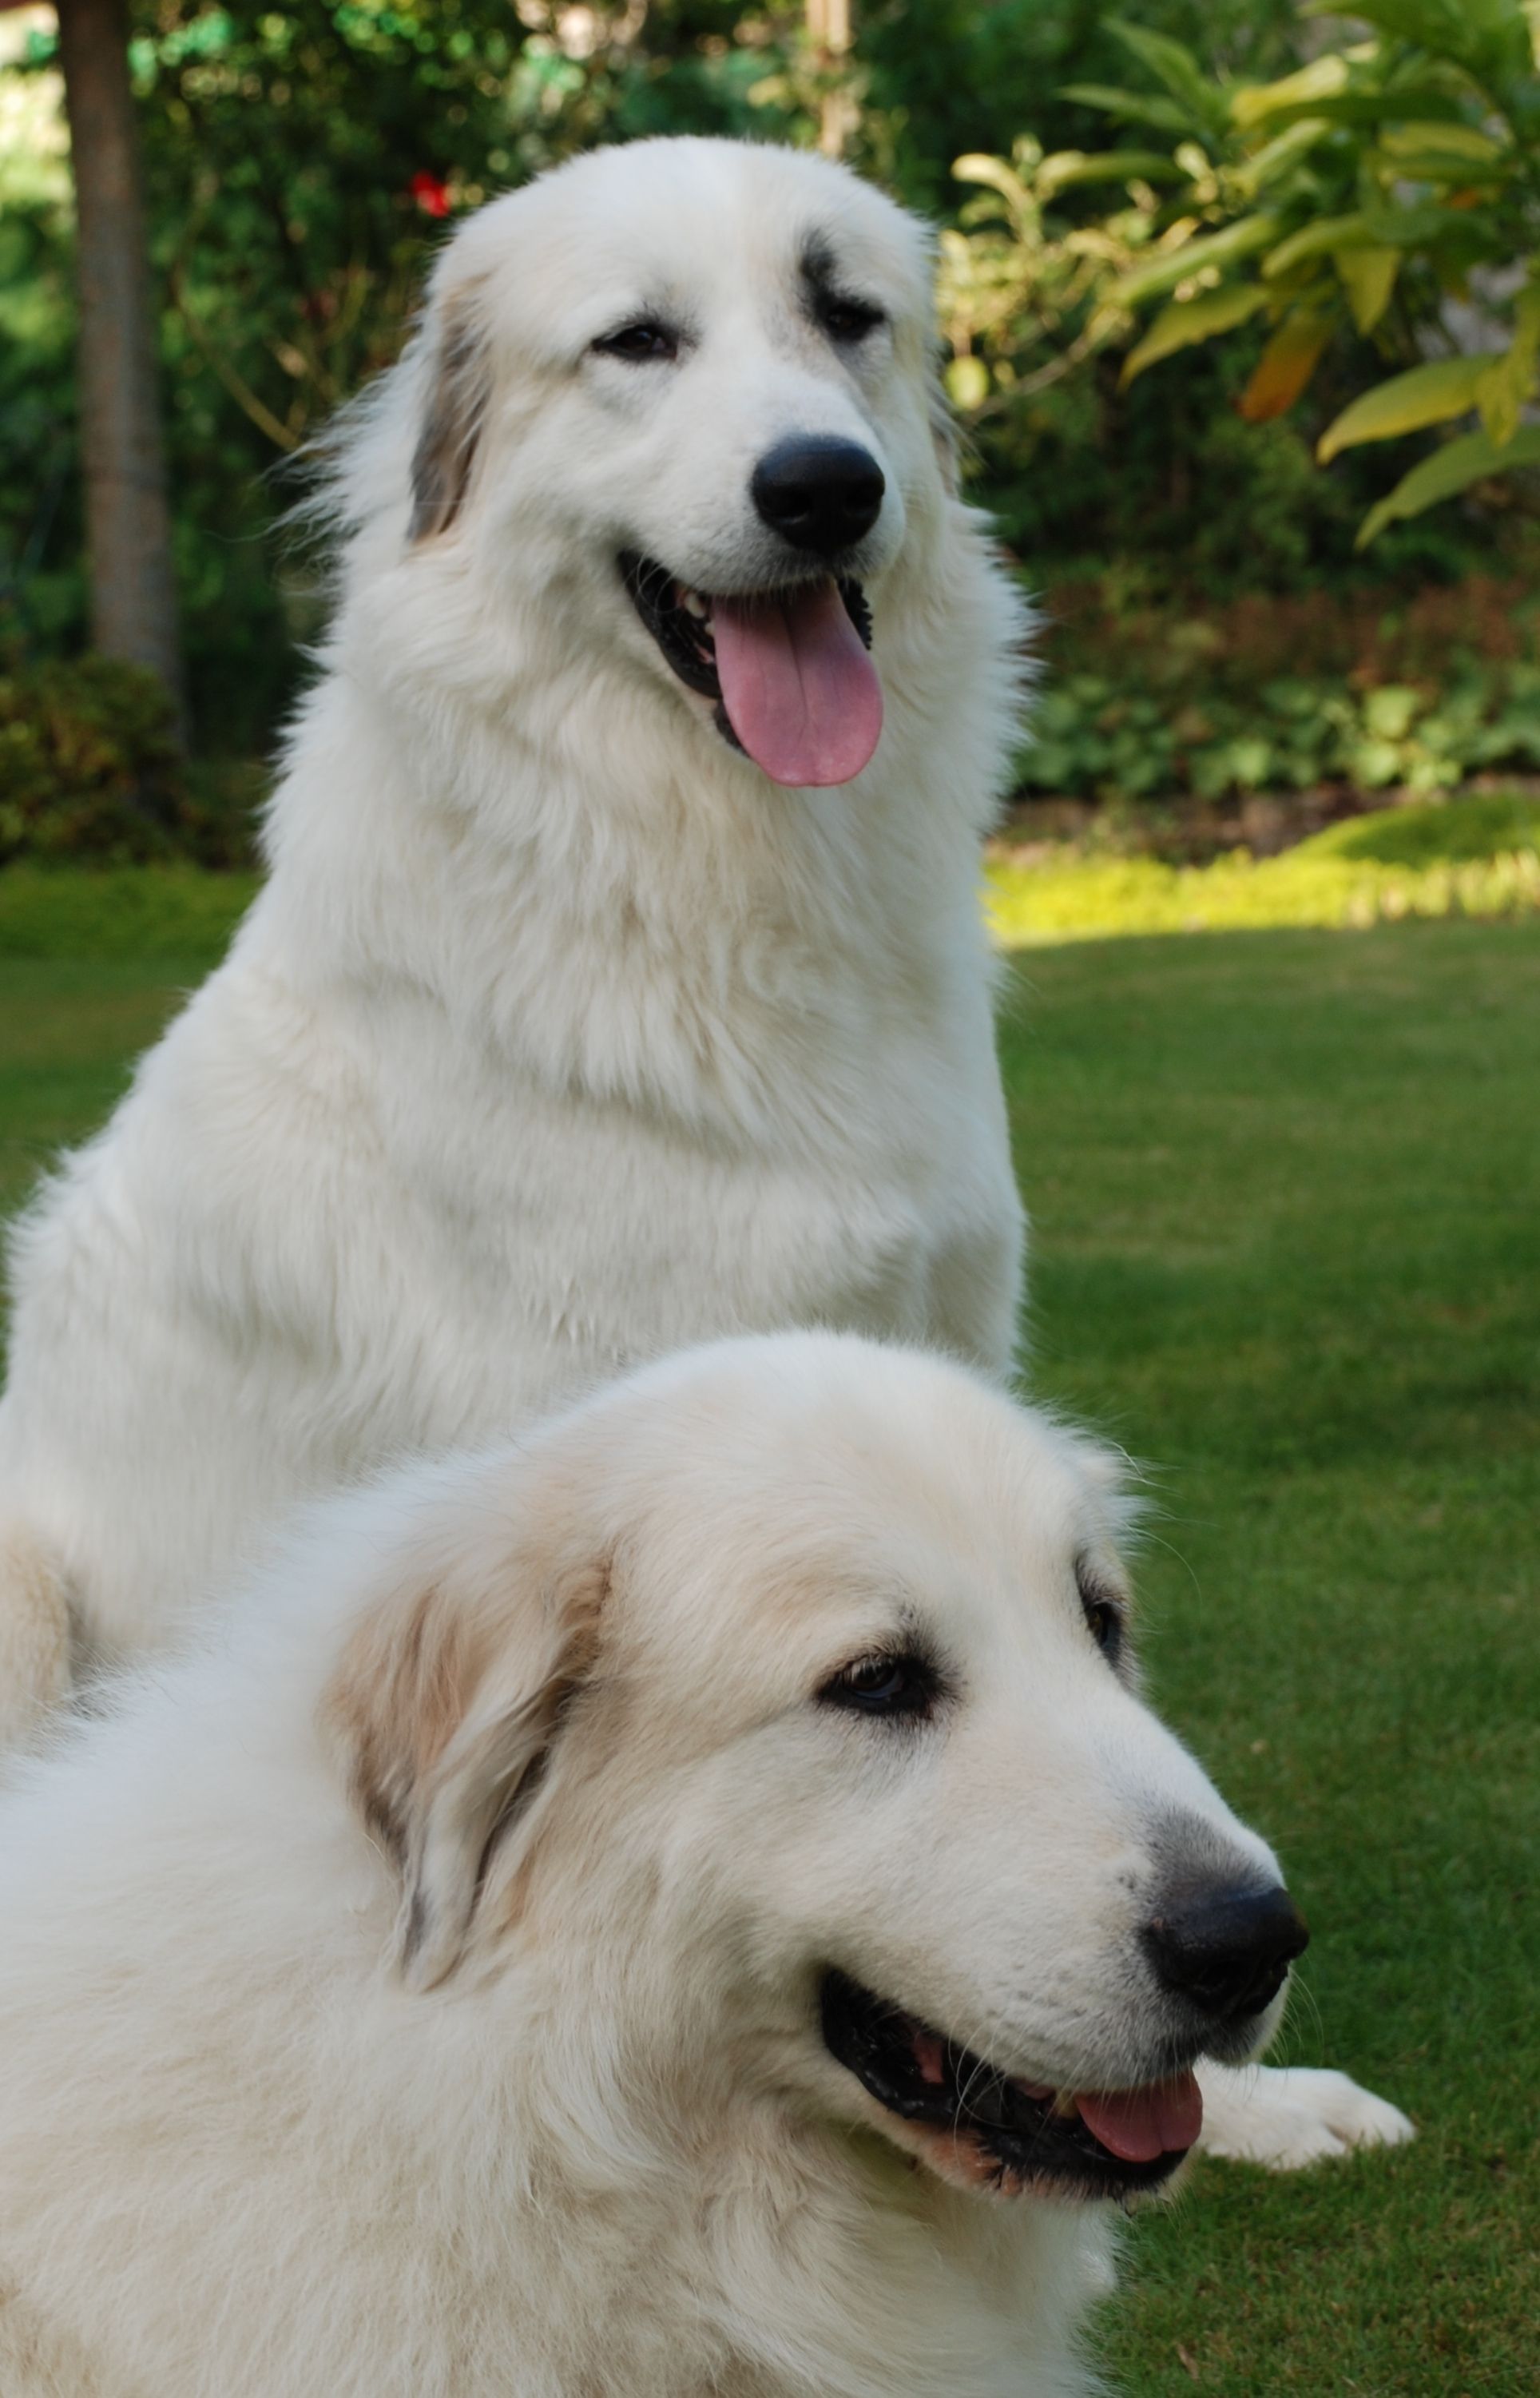 Beautiful Great Pyrenees dogs photo. Great pyrenees dog, Great pyrenees, Dog photo